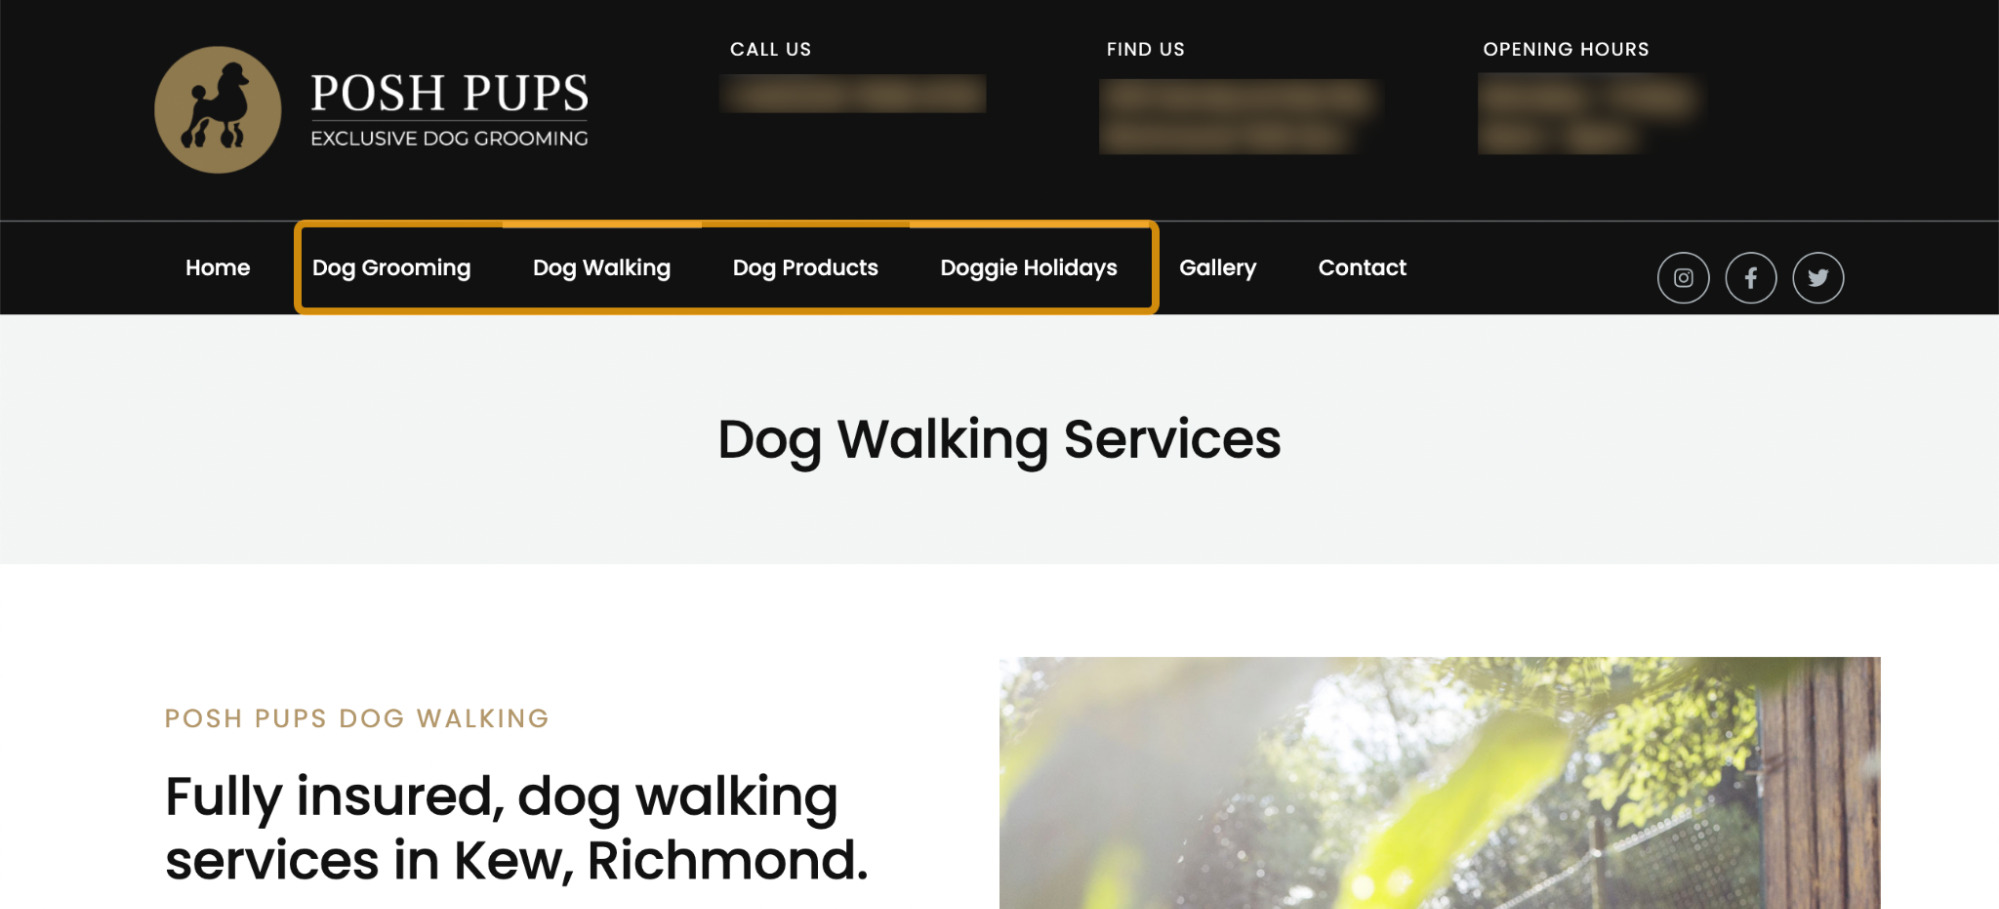 Example of services and products featured in the navigation, via Posh Pups Kew